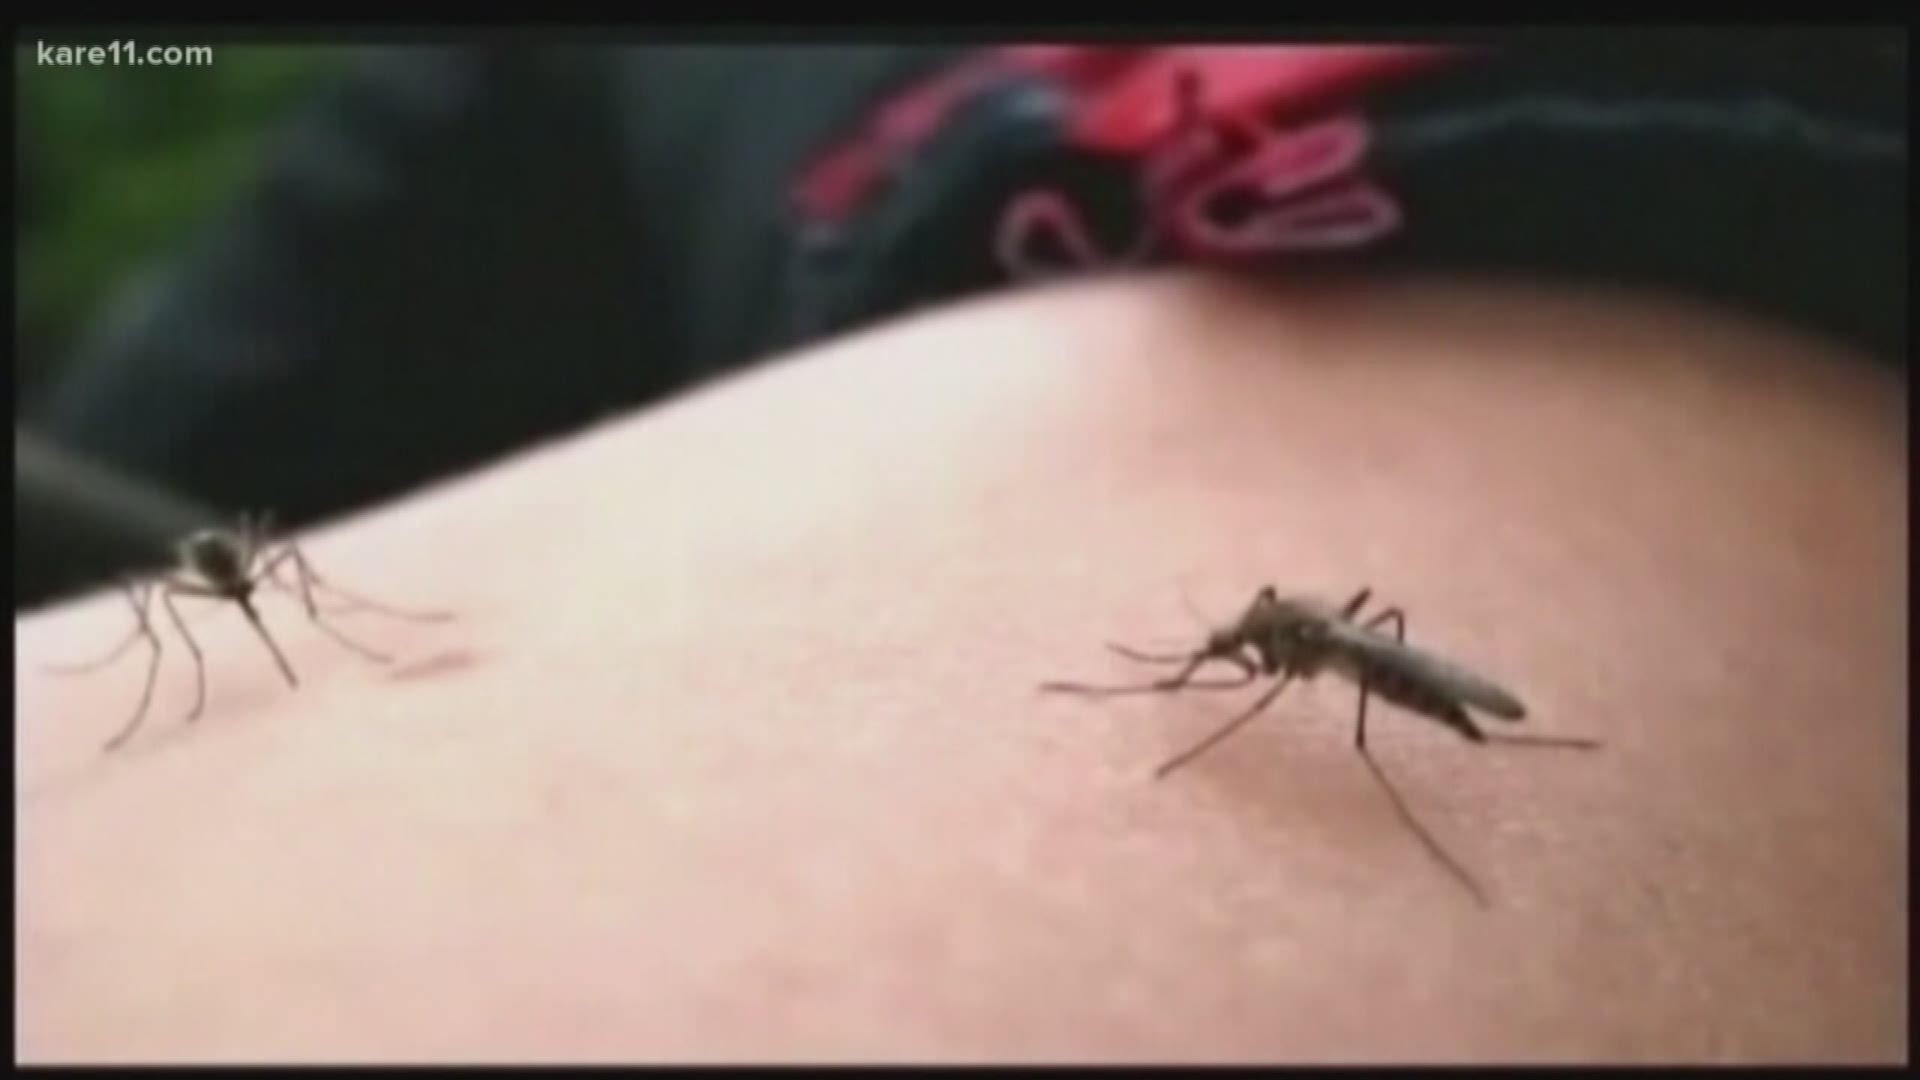 Mosquitos are the pest most Minnesotans love to hate. And now, there's bad news on the scientific front... the pesky critters seem to be evolving faster than the pesticides meant to control them.